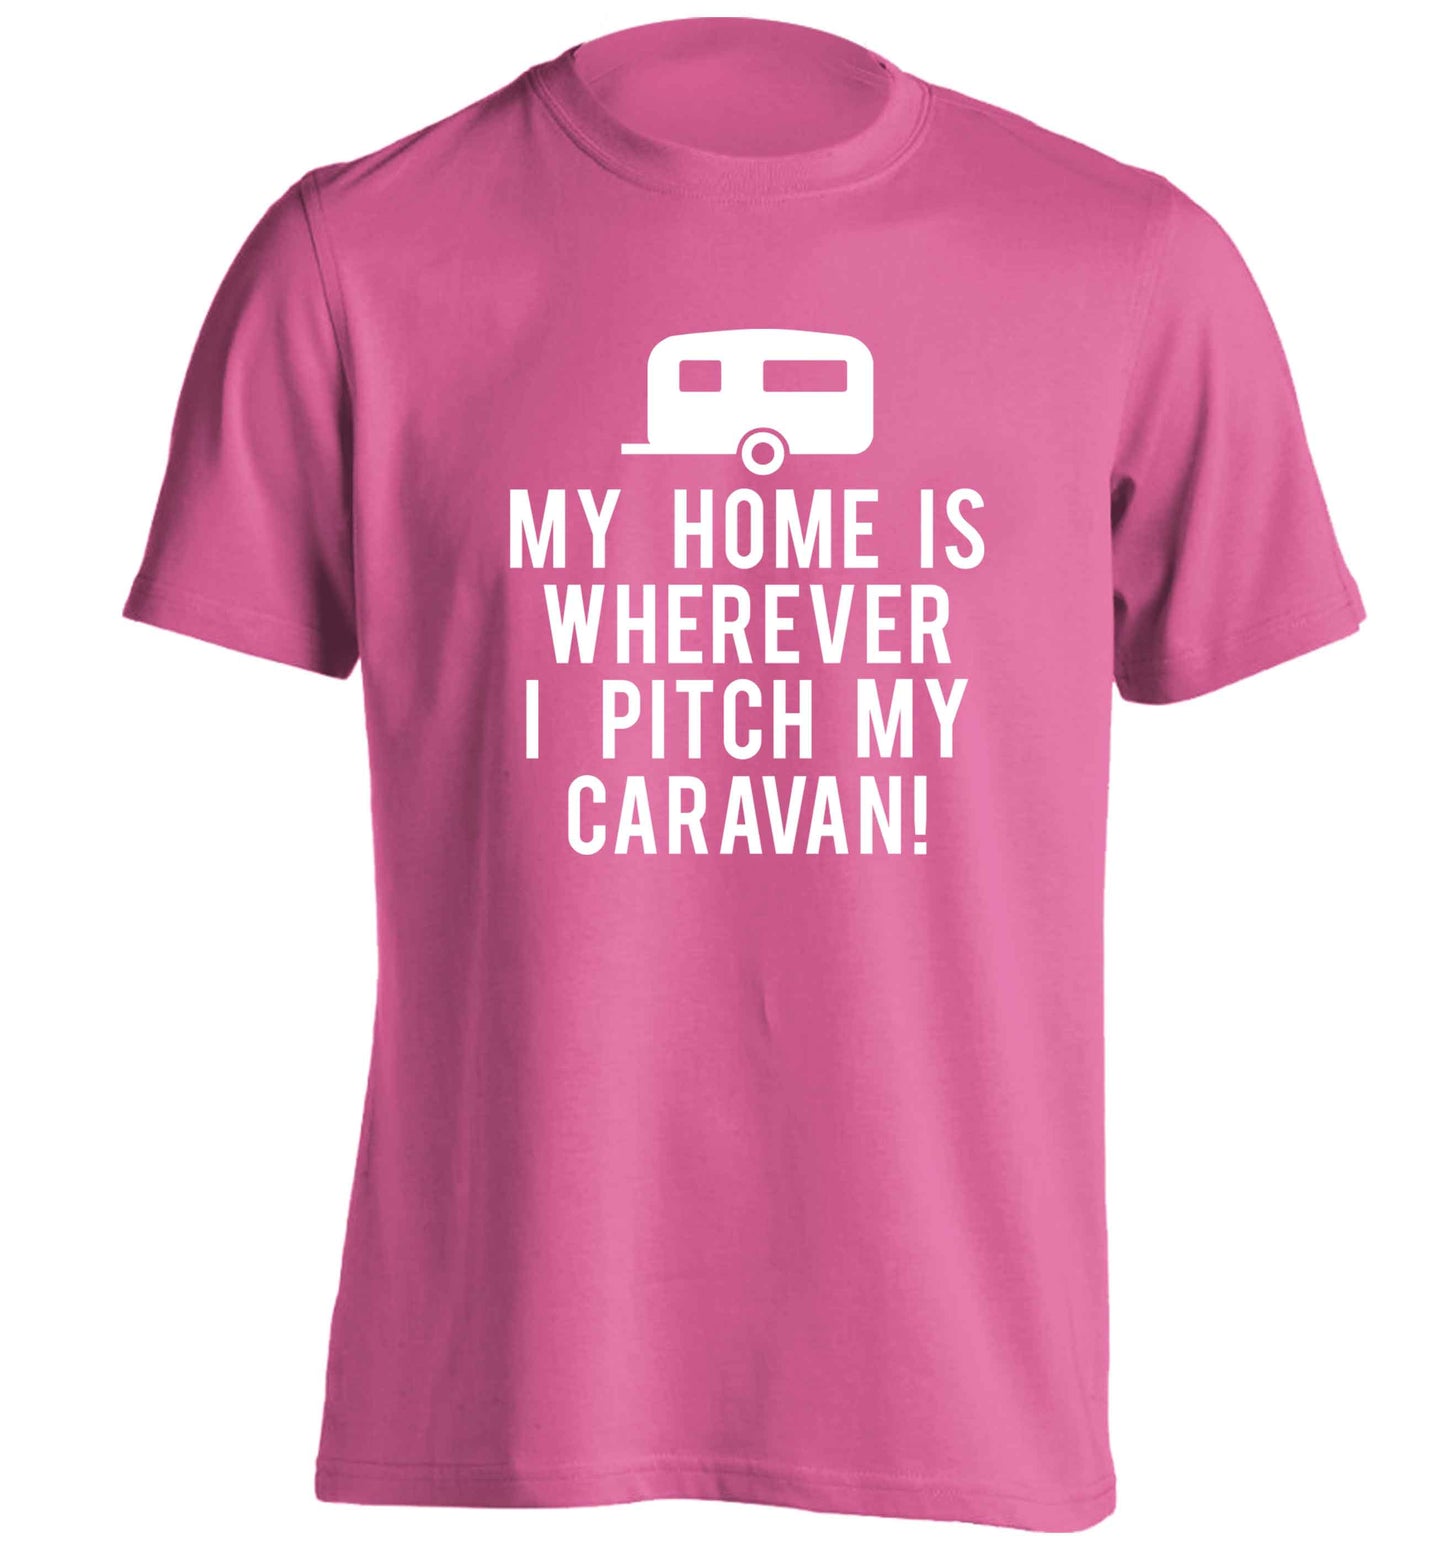 My home is wherever I pitch my caravan adults unisex pink Tshirt 2XL